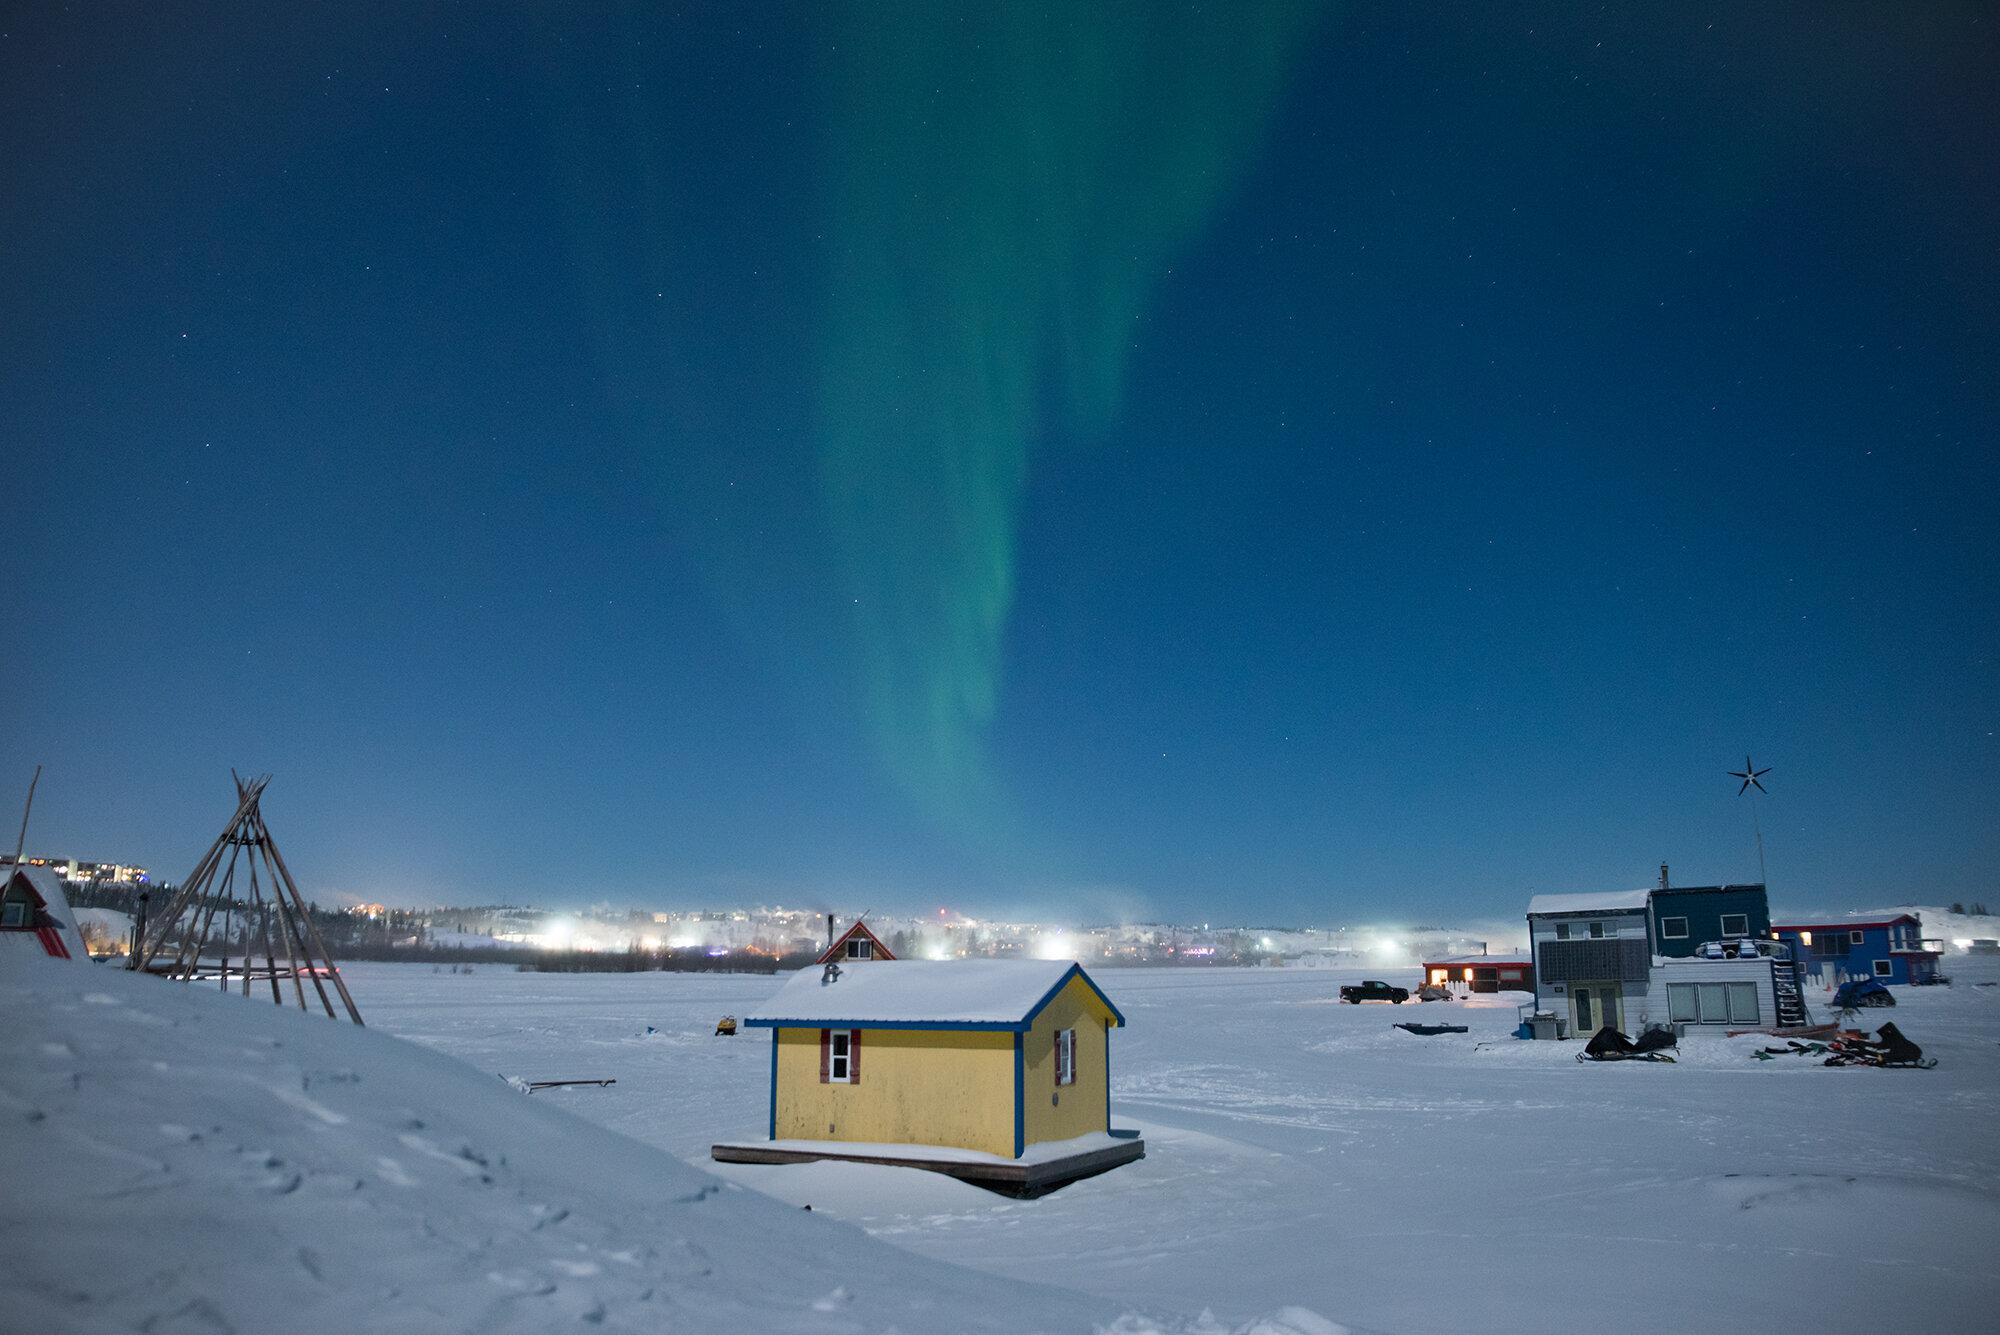 Pandemic Plan - The New York Times - The aurora borealis - more commonly known as the northern...